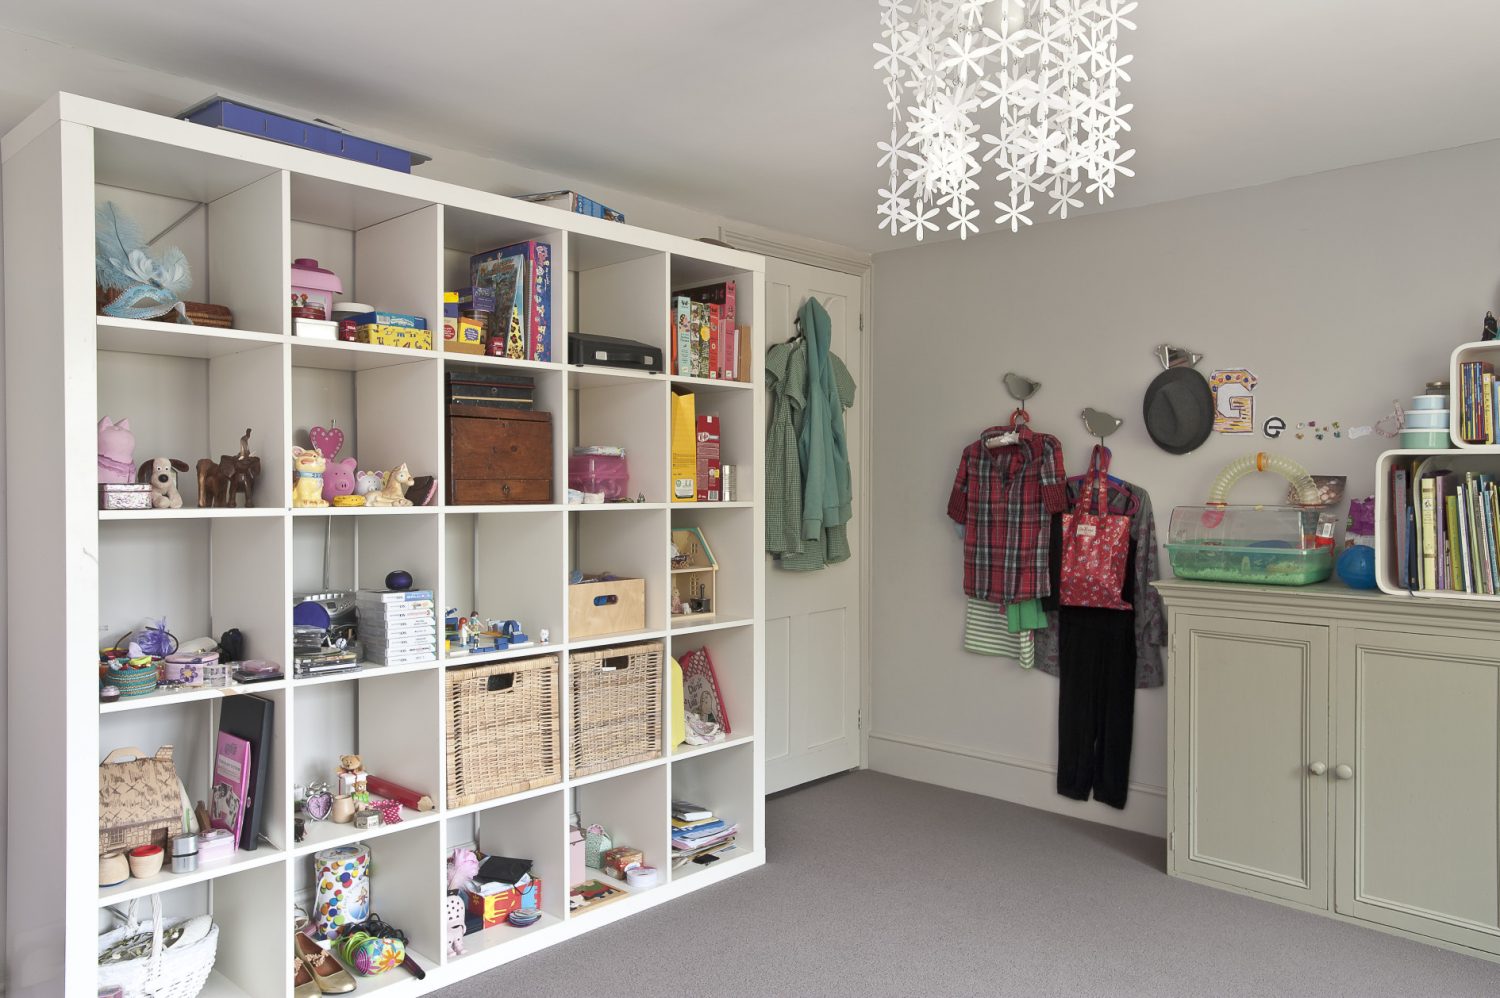 modular storage unit provides an attractive display whilst at the same time keeping the floor free of clutter